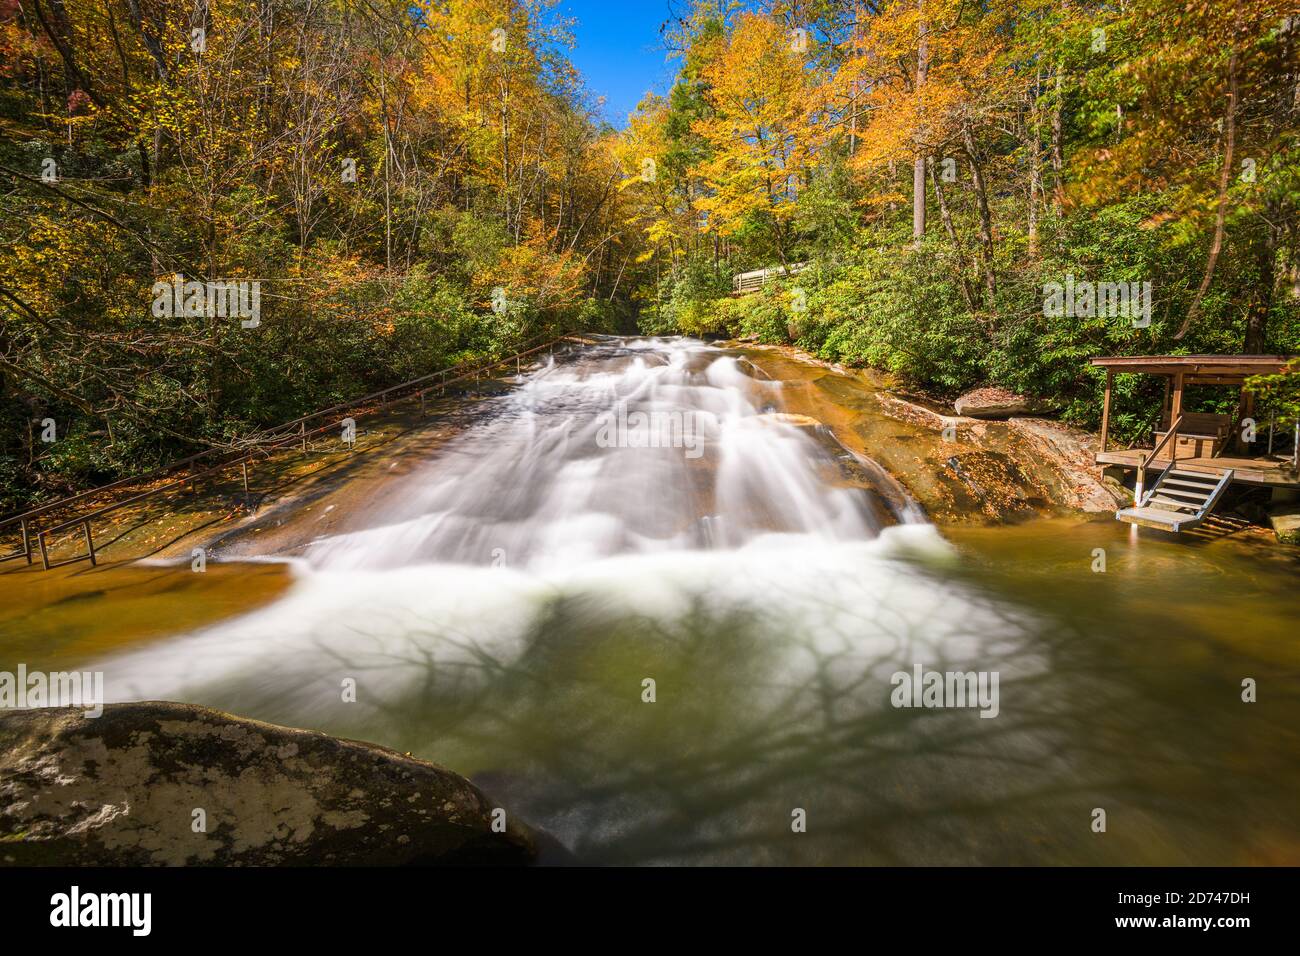 Sliding Rock Falls on Looking Glass Creek in Pisgah National Forest, North Carolina, USA in the autumn season. Stock Photo